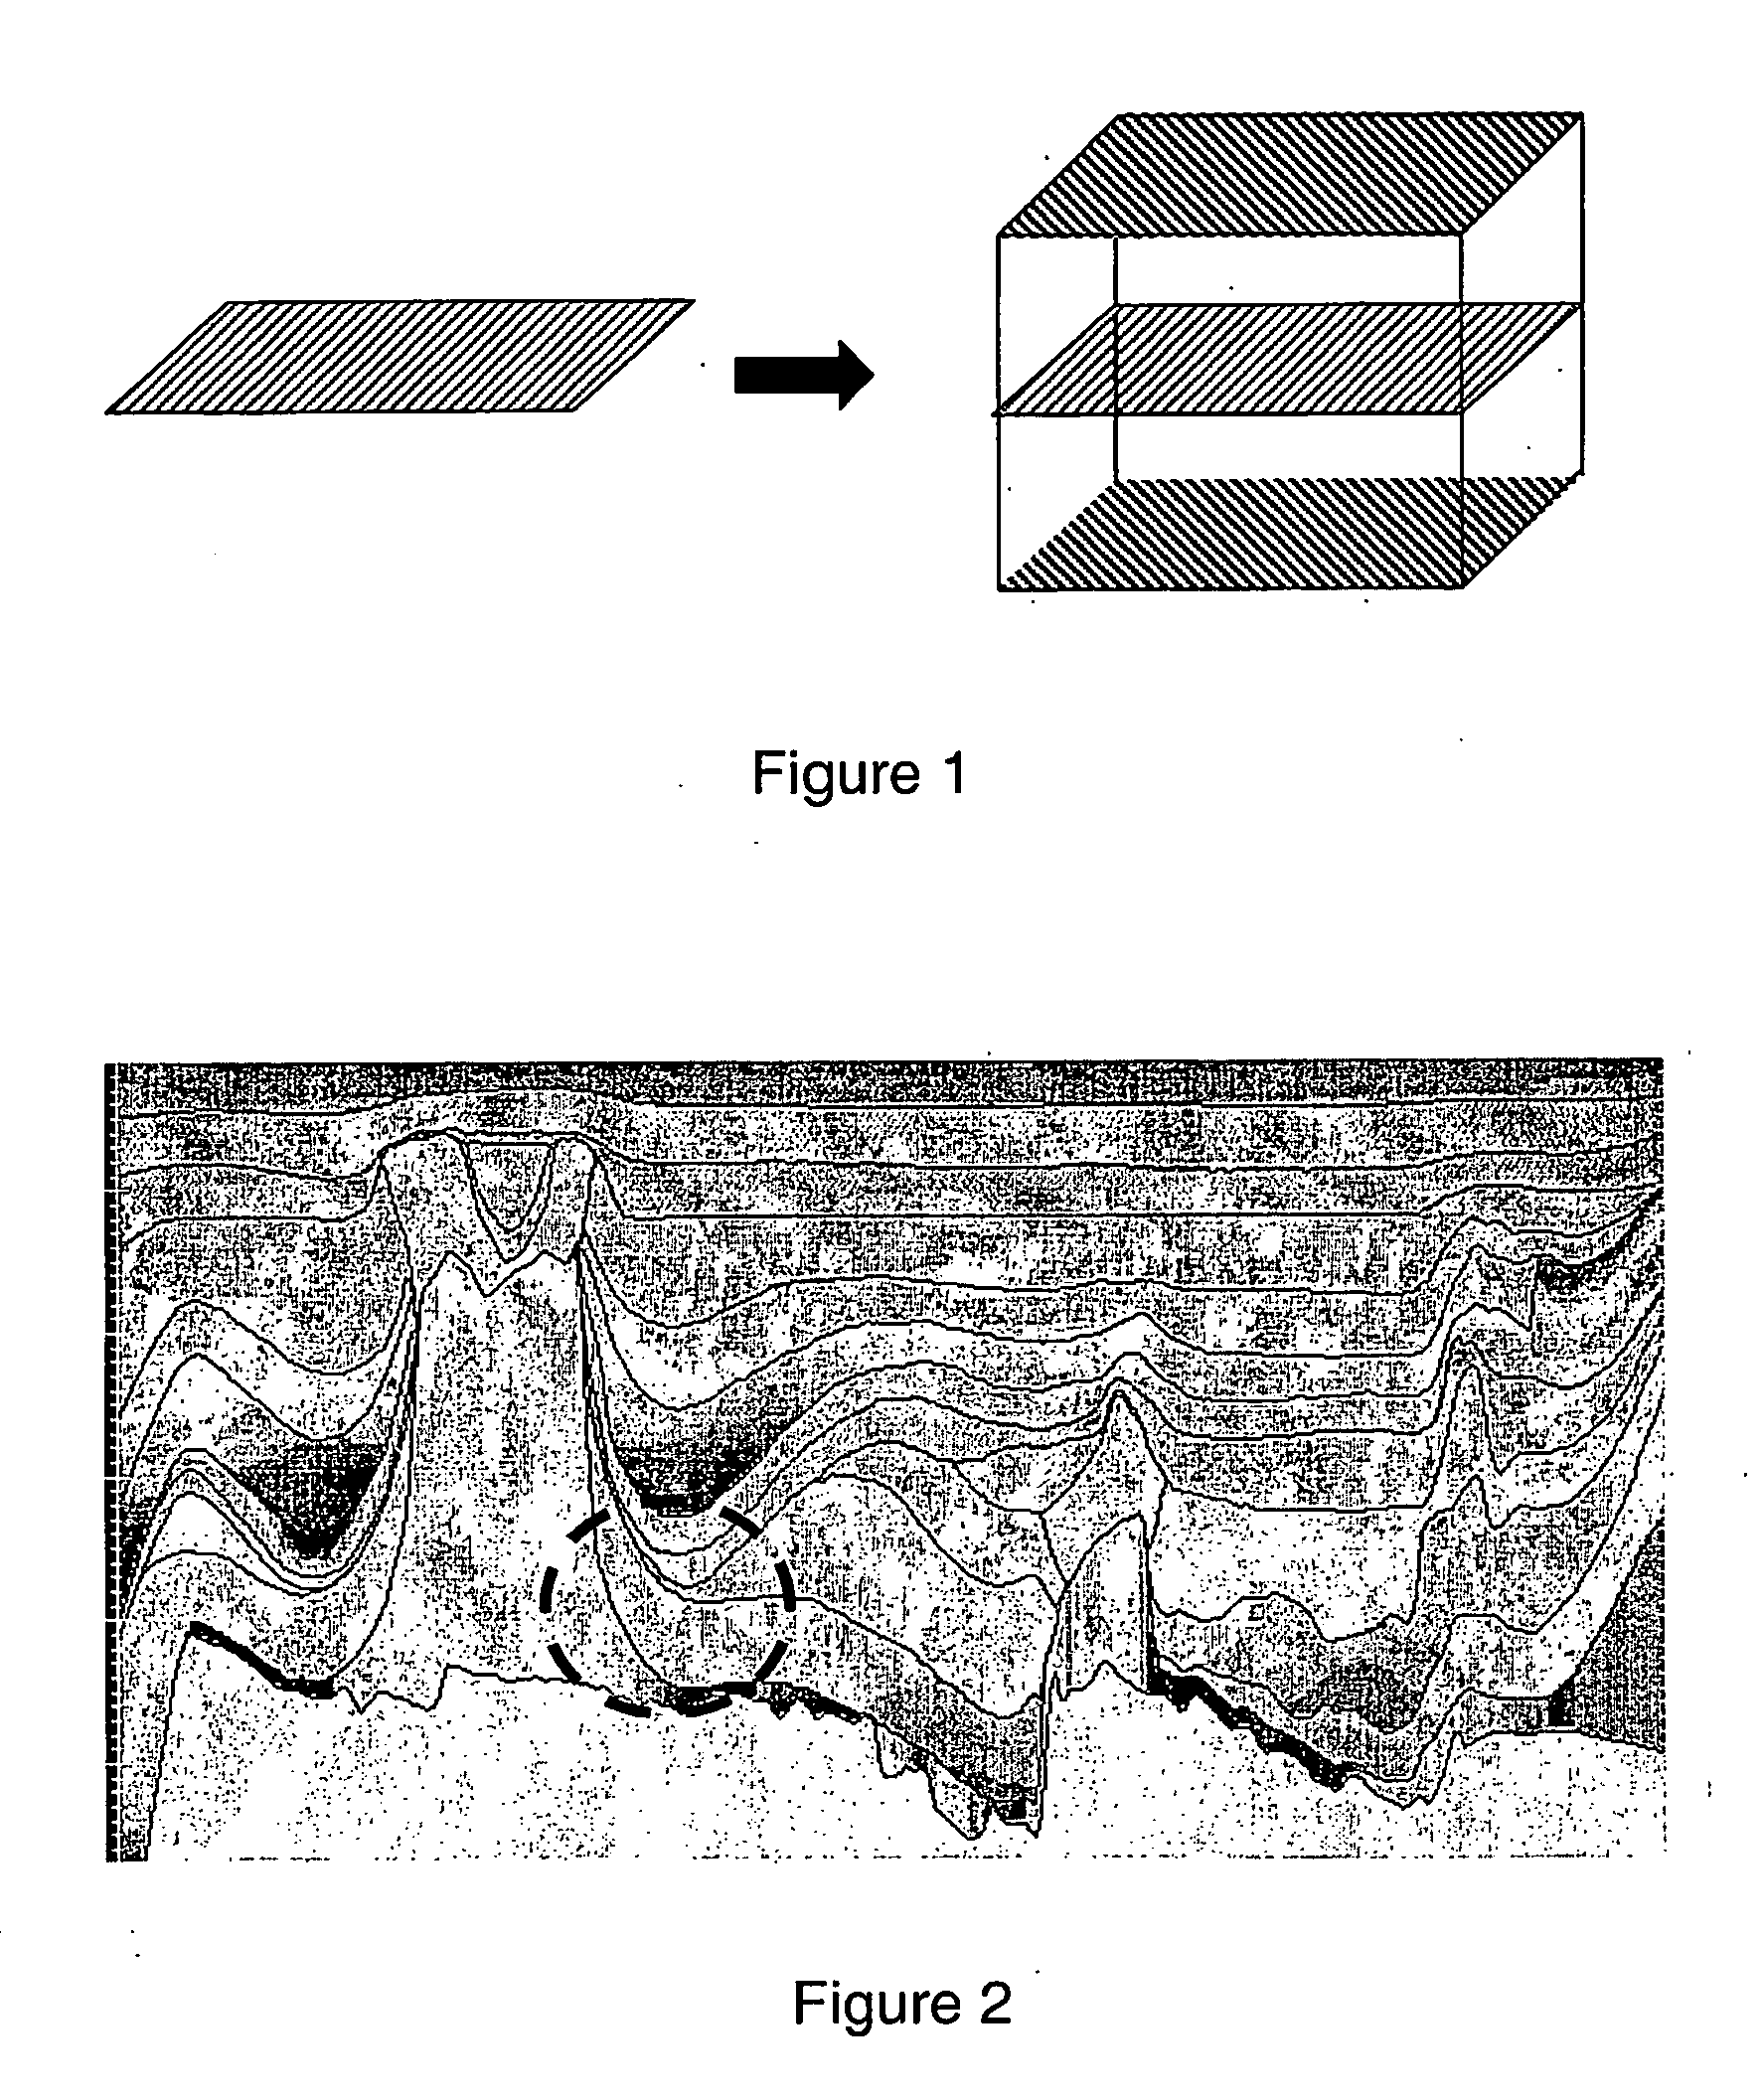 System and method for representing and processing and modeling subterranean surfaces